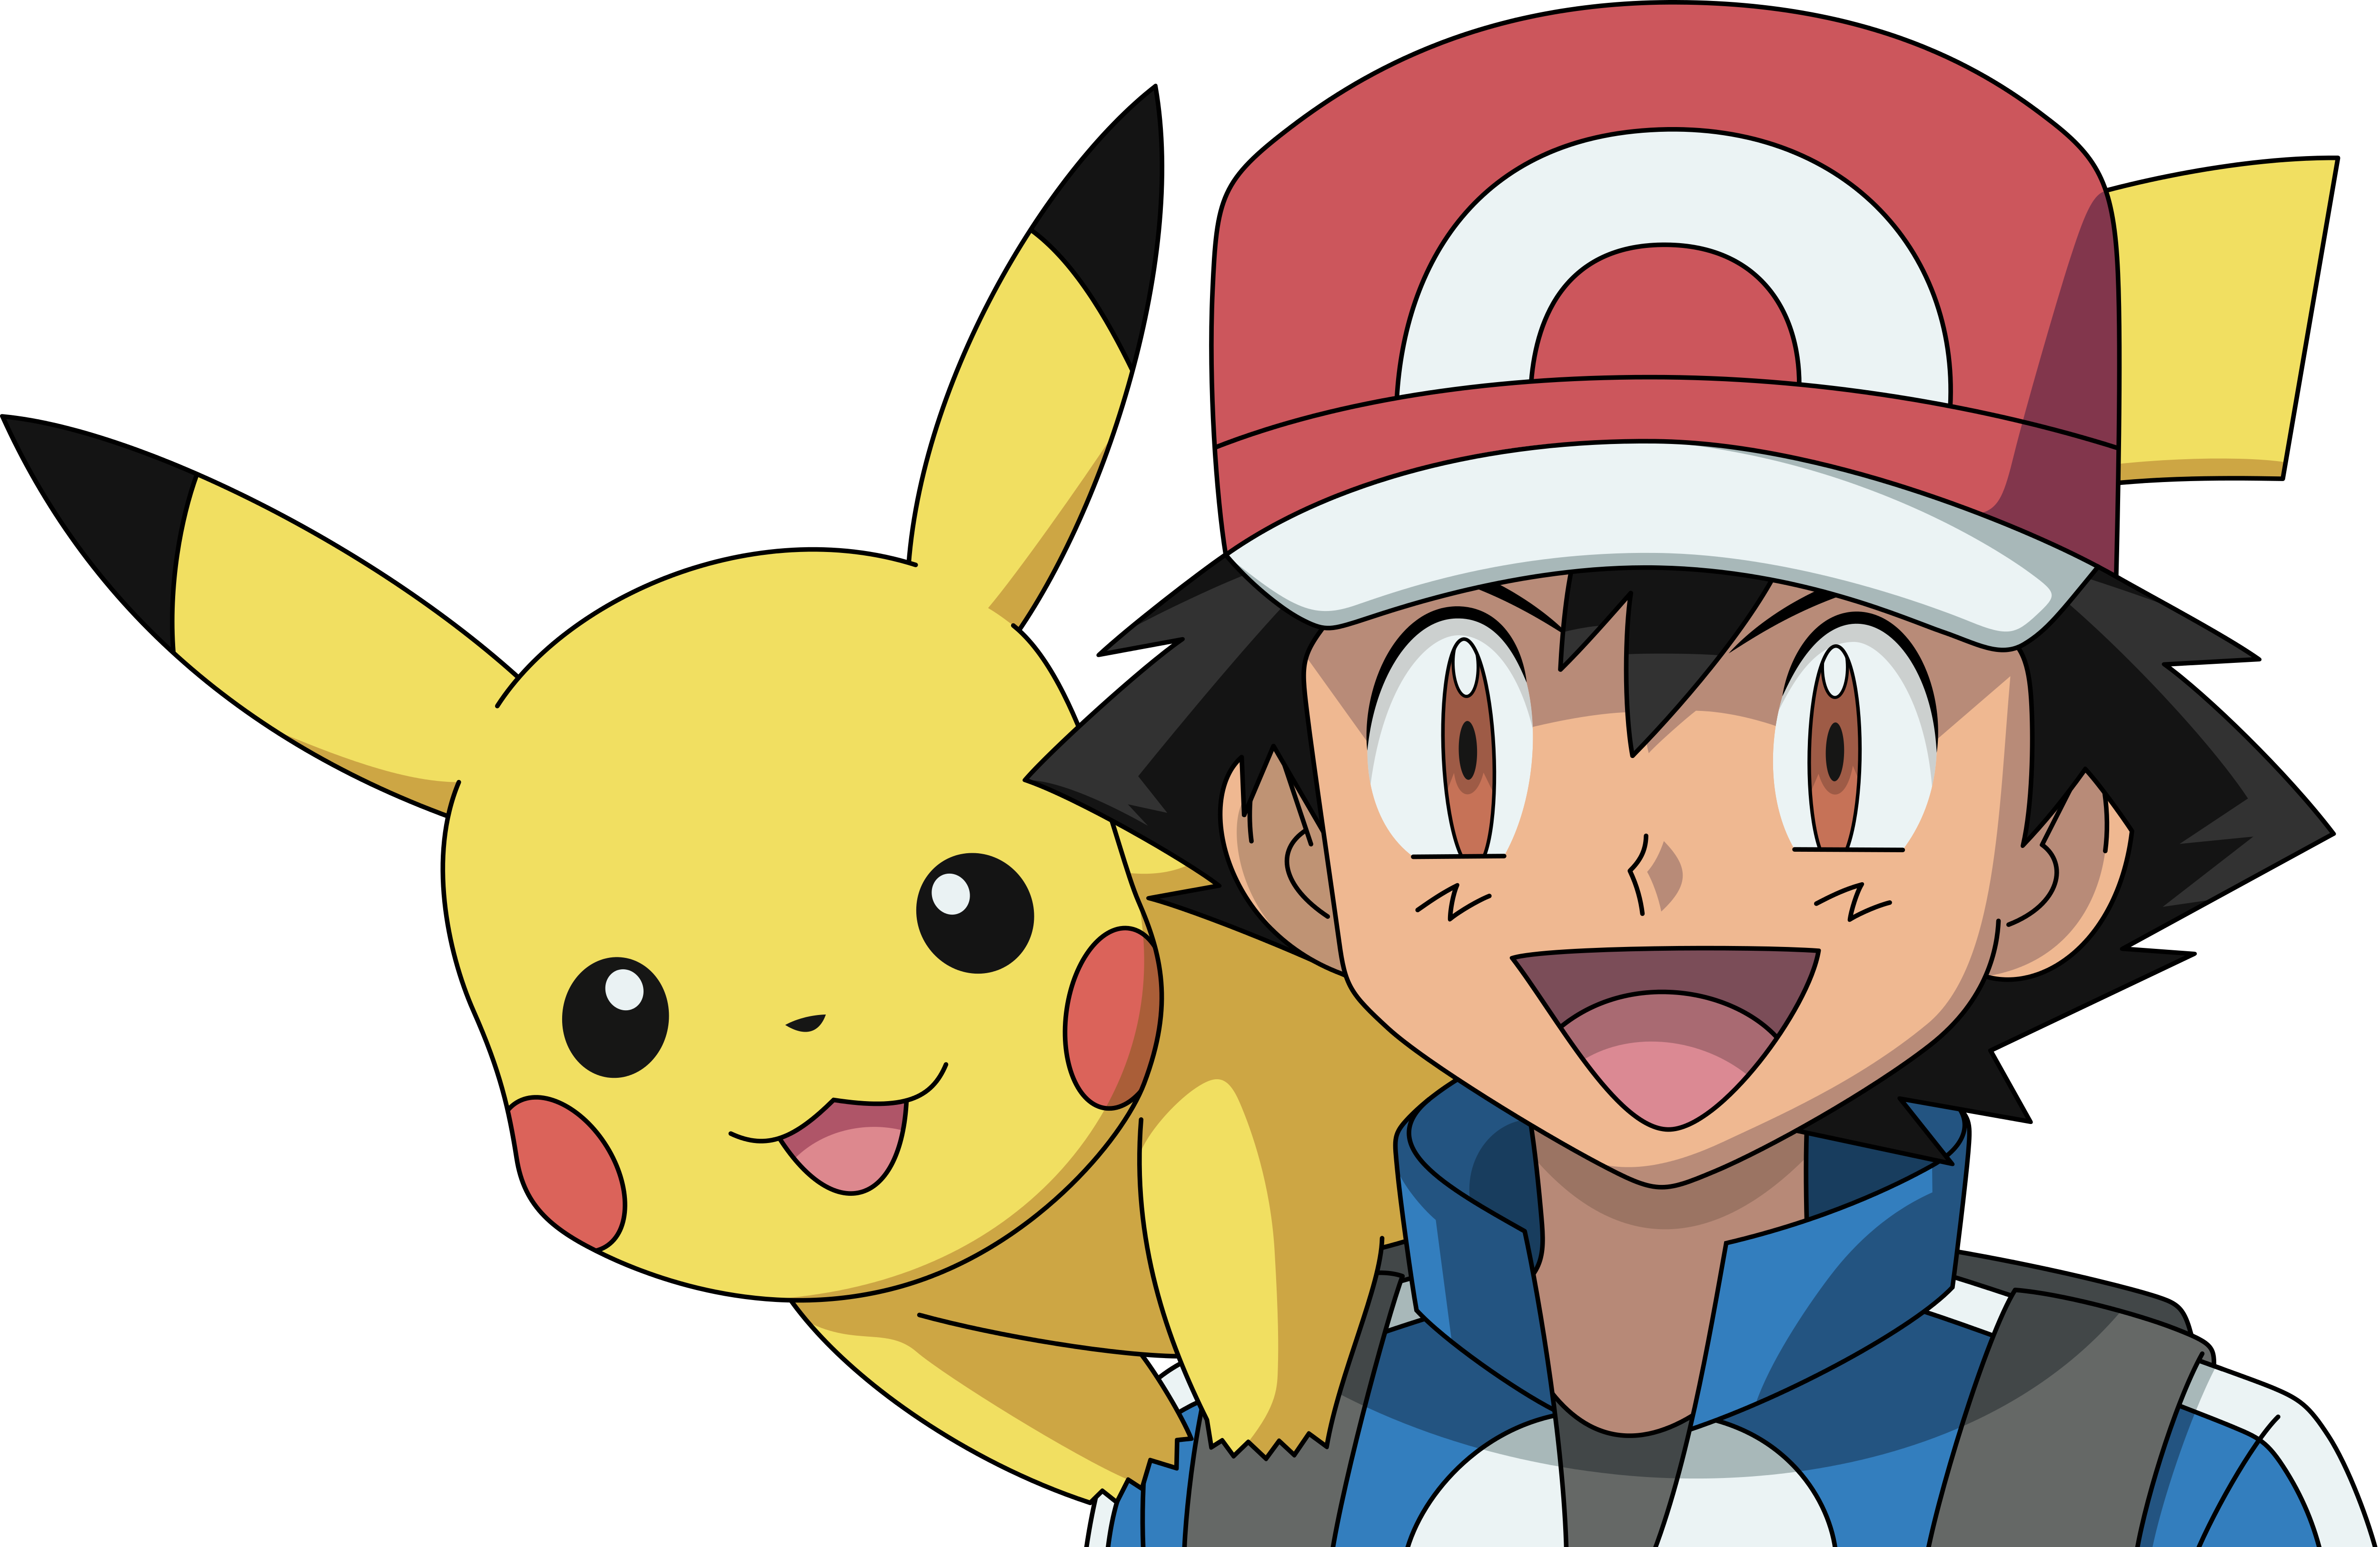 Vector #599 - Ash and Pikachu by DashieSparkle on DeviantArt